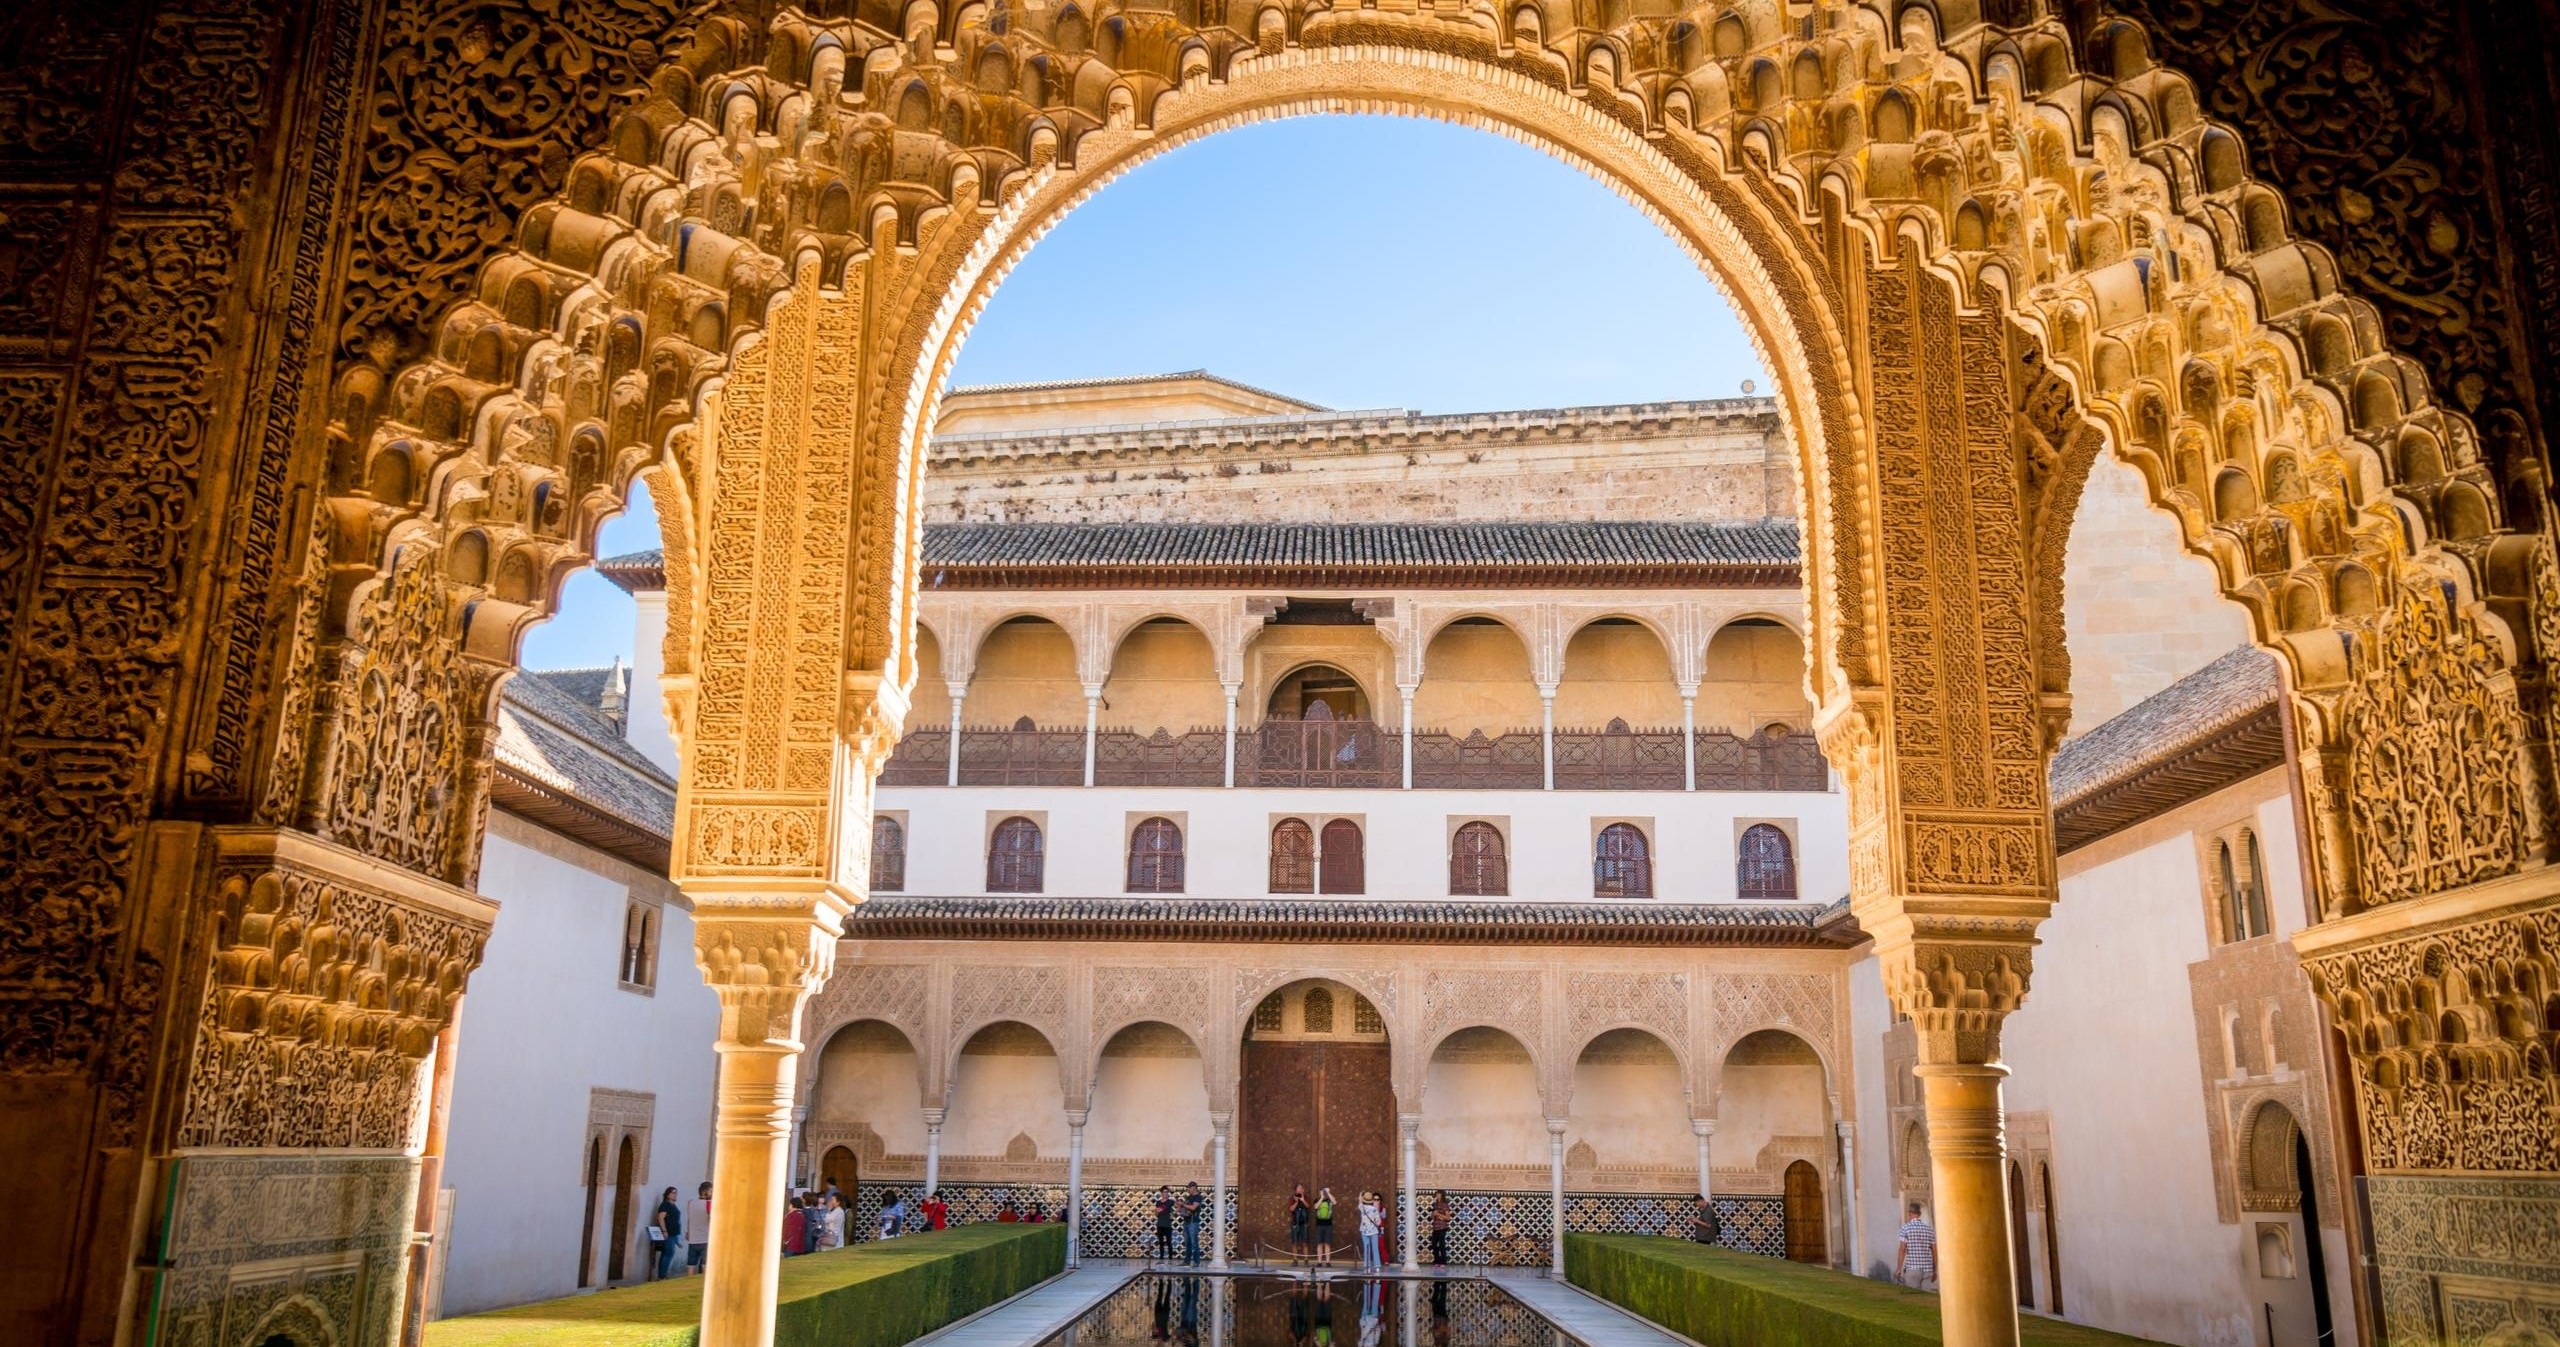 Premium Guided Tour to the Alhambra in Full with Generalife Gardens and Nasrid Palaces in Small Group - Accommodations in Granada